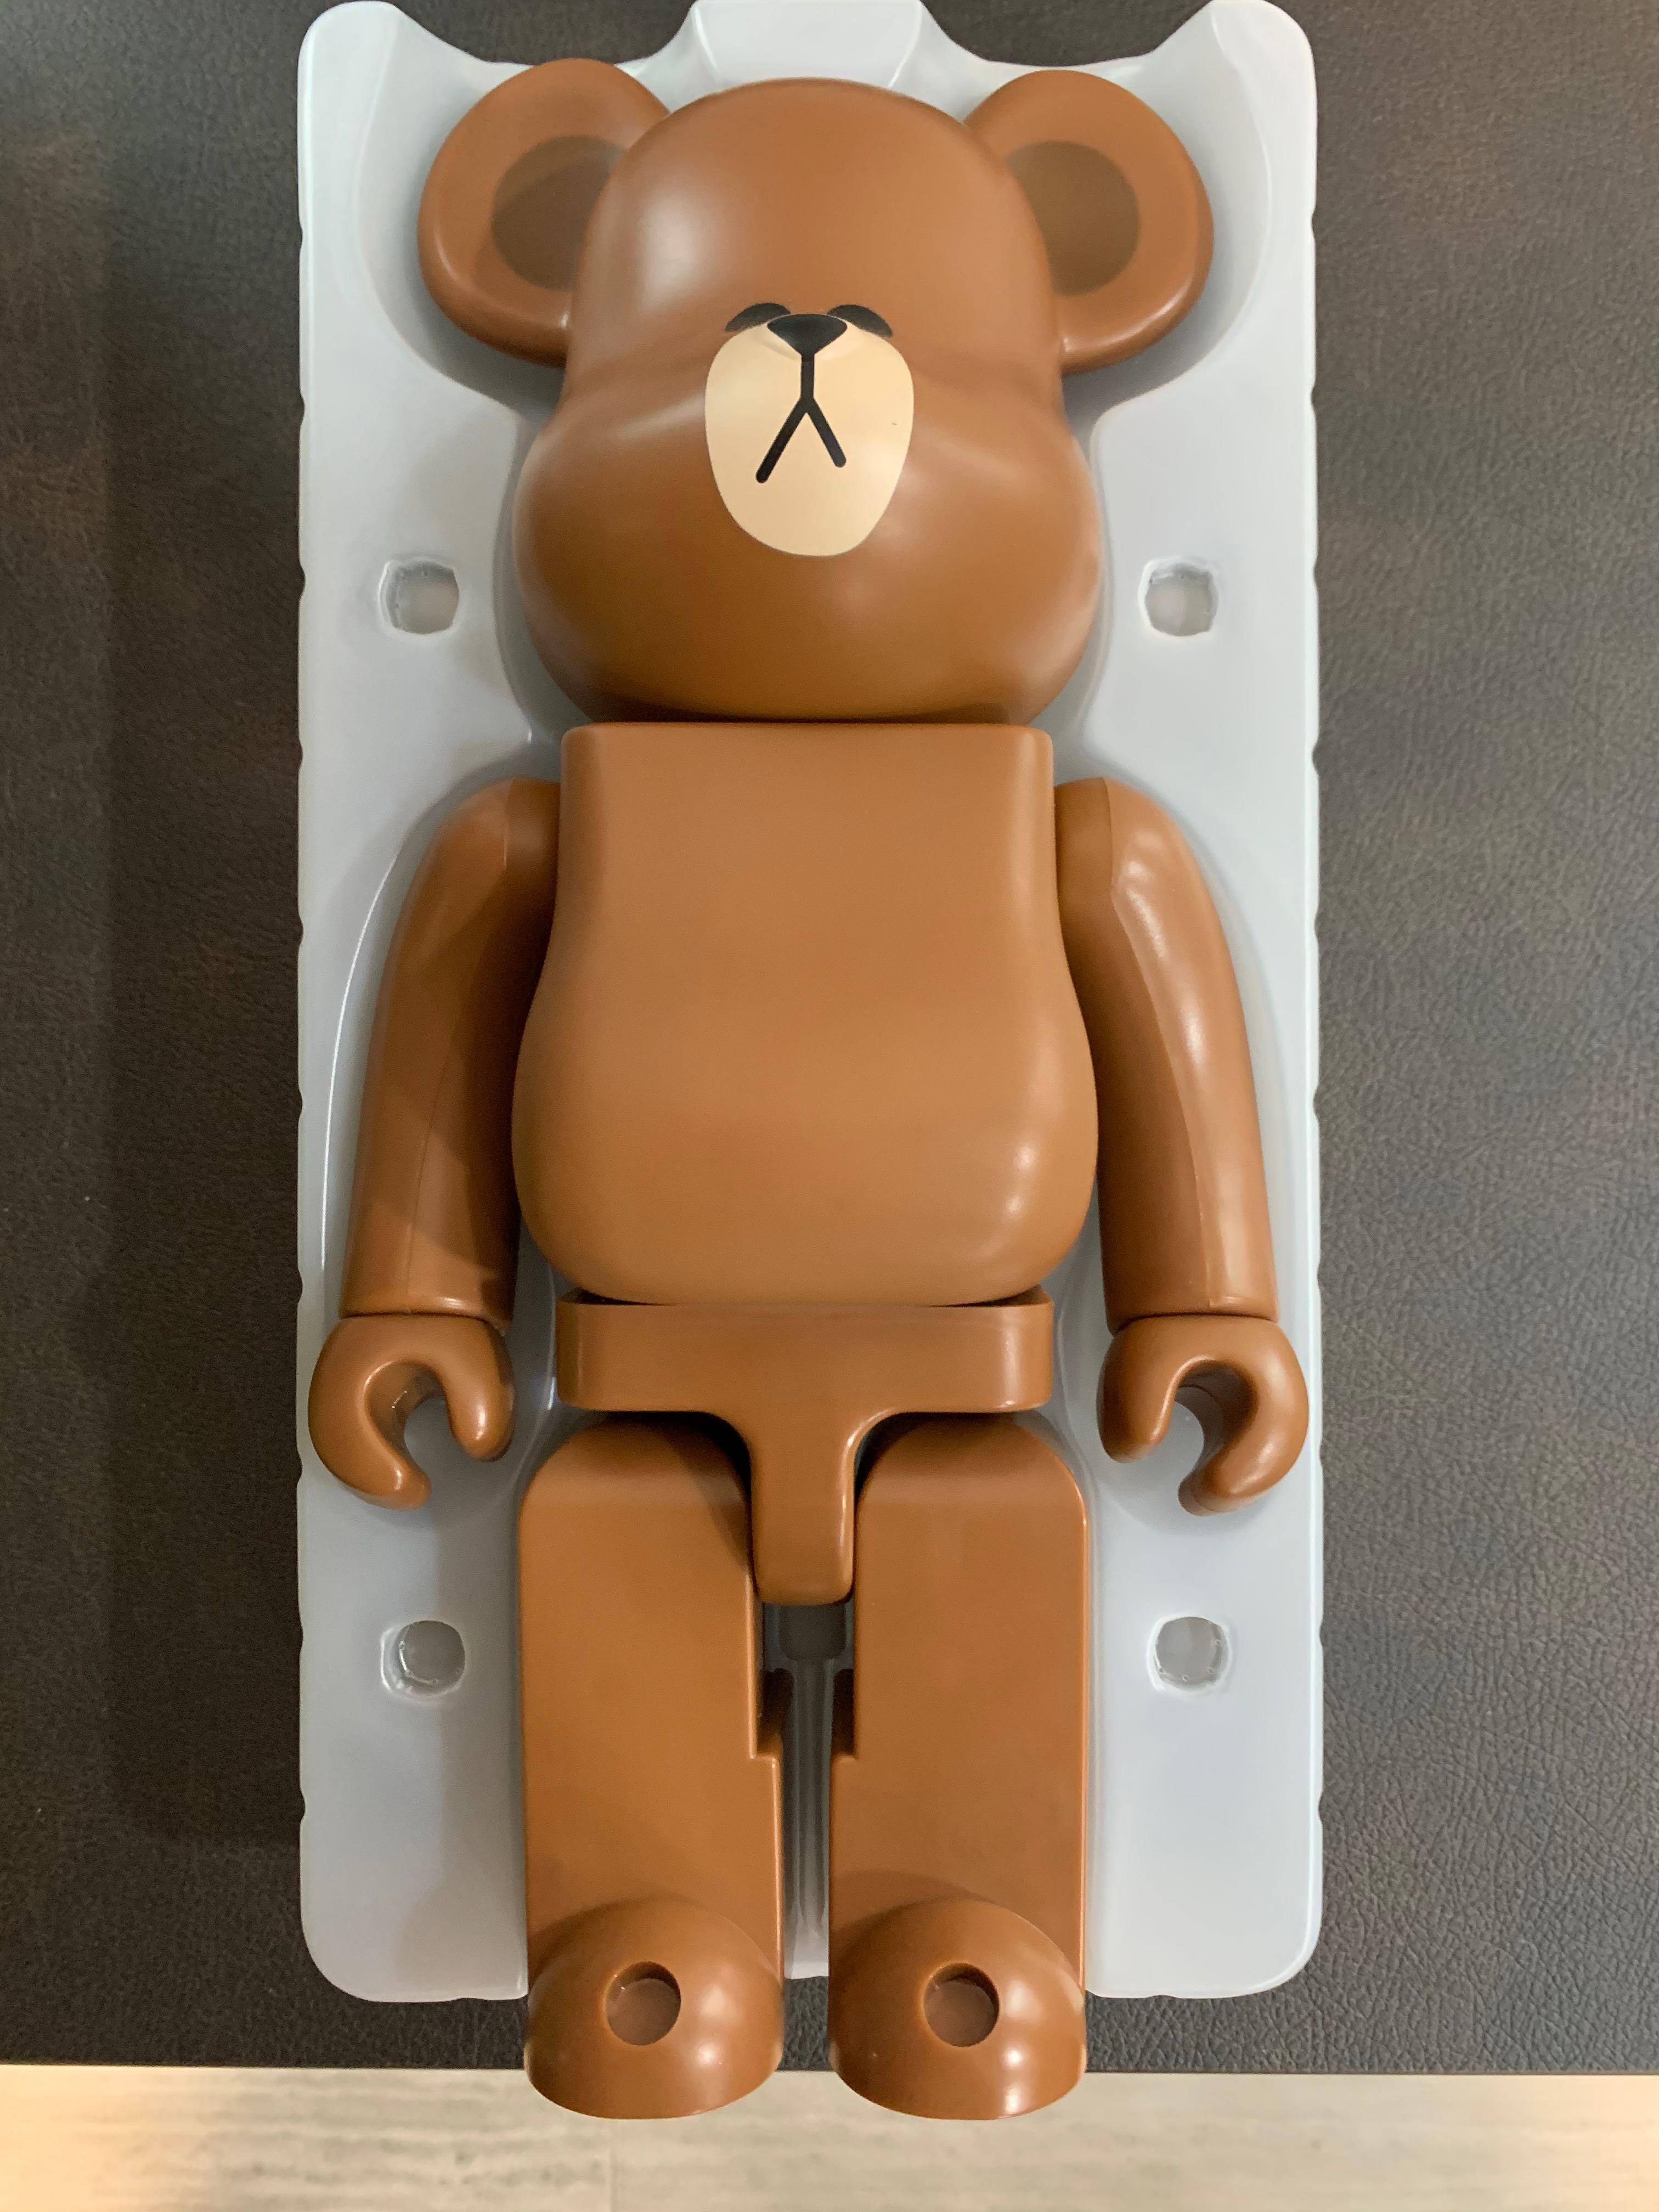 Bearbrick be@rbrick 400% brown from Line